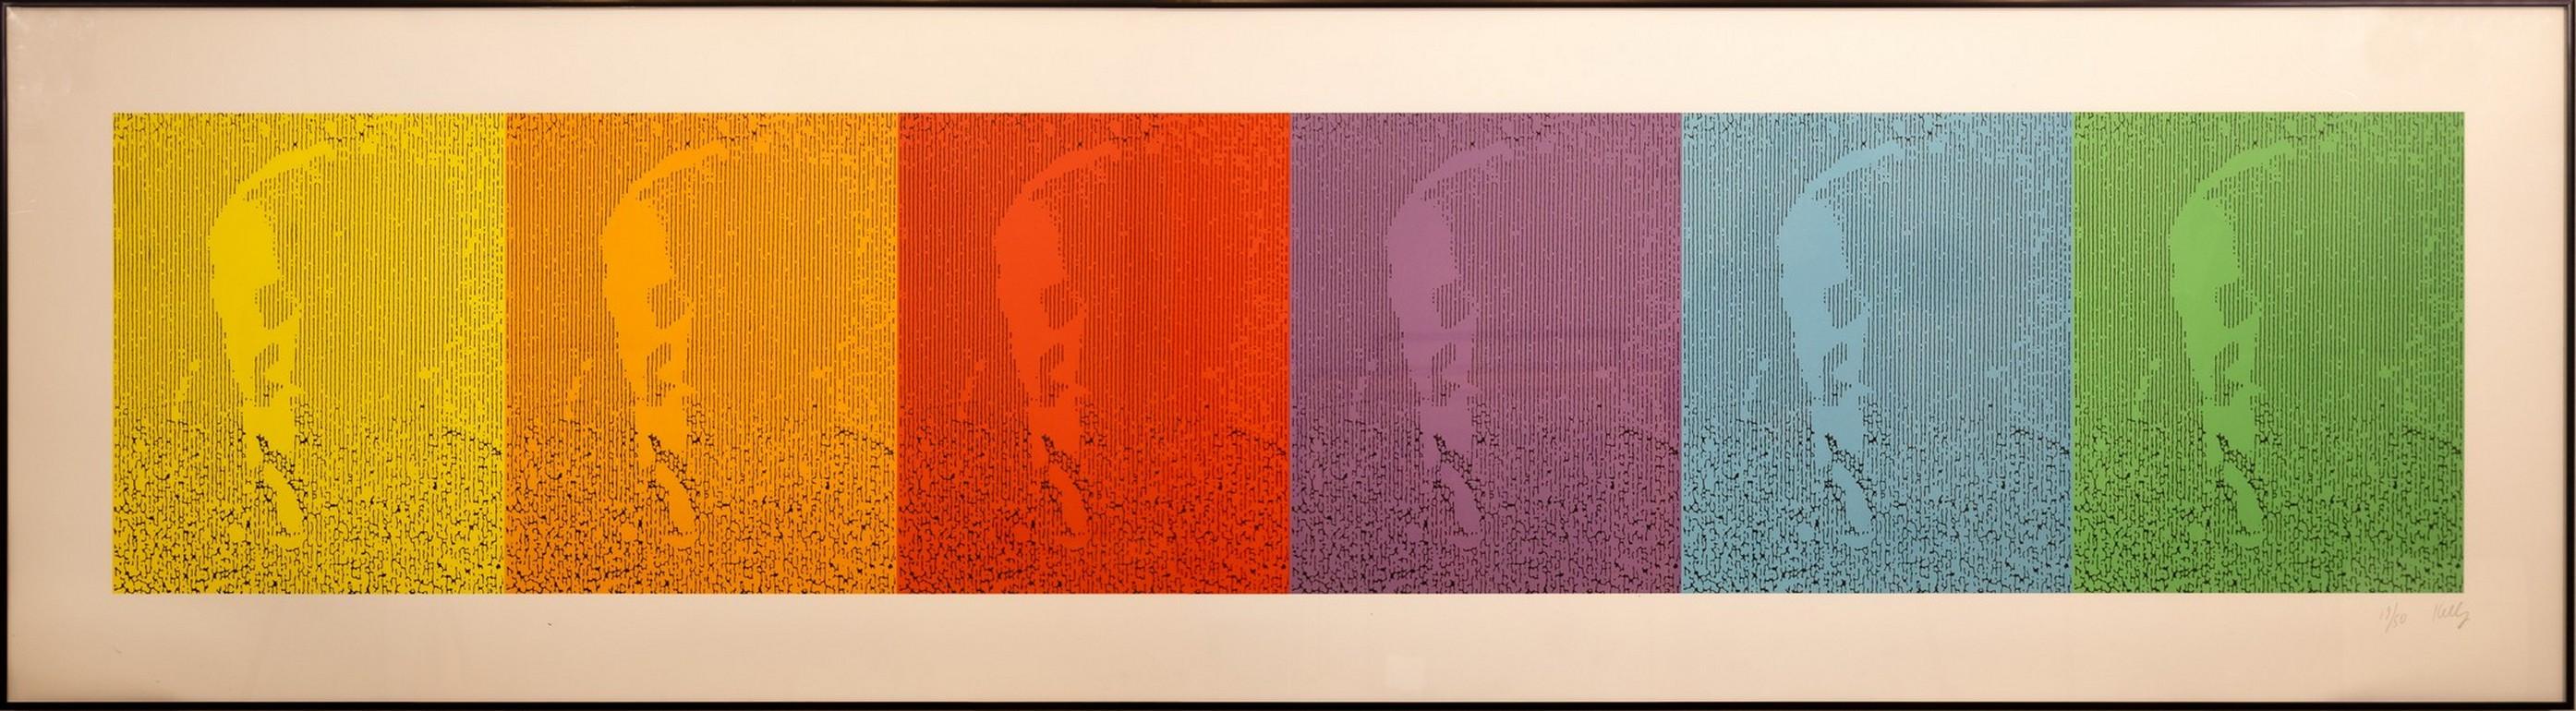 A vibrant minimalist lithograph in colors on Arches 88 paper titled “EK/Spectrum I (From Portraits)” by Ellsworth Kelly. Hand signed bottom right with an annotation of 19/50. Published by Gemini G.E.L., Los Angeles, with their blindstamp and